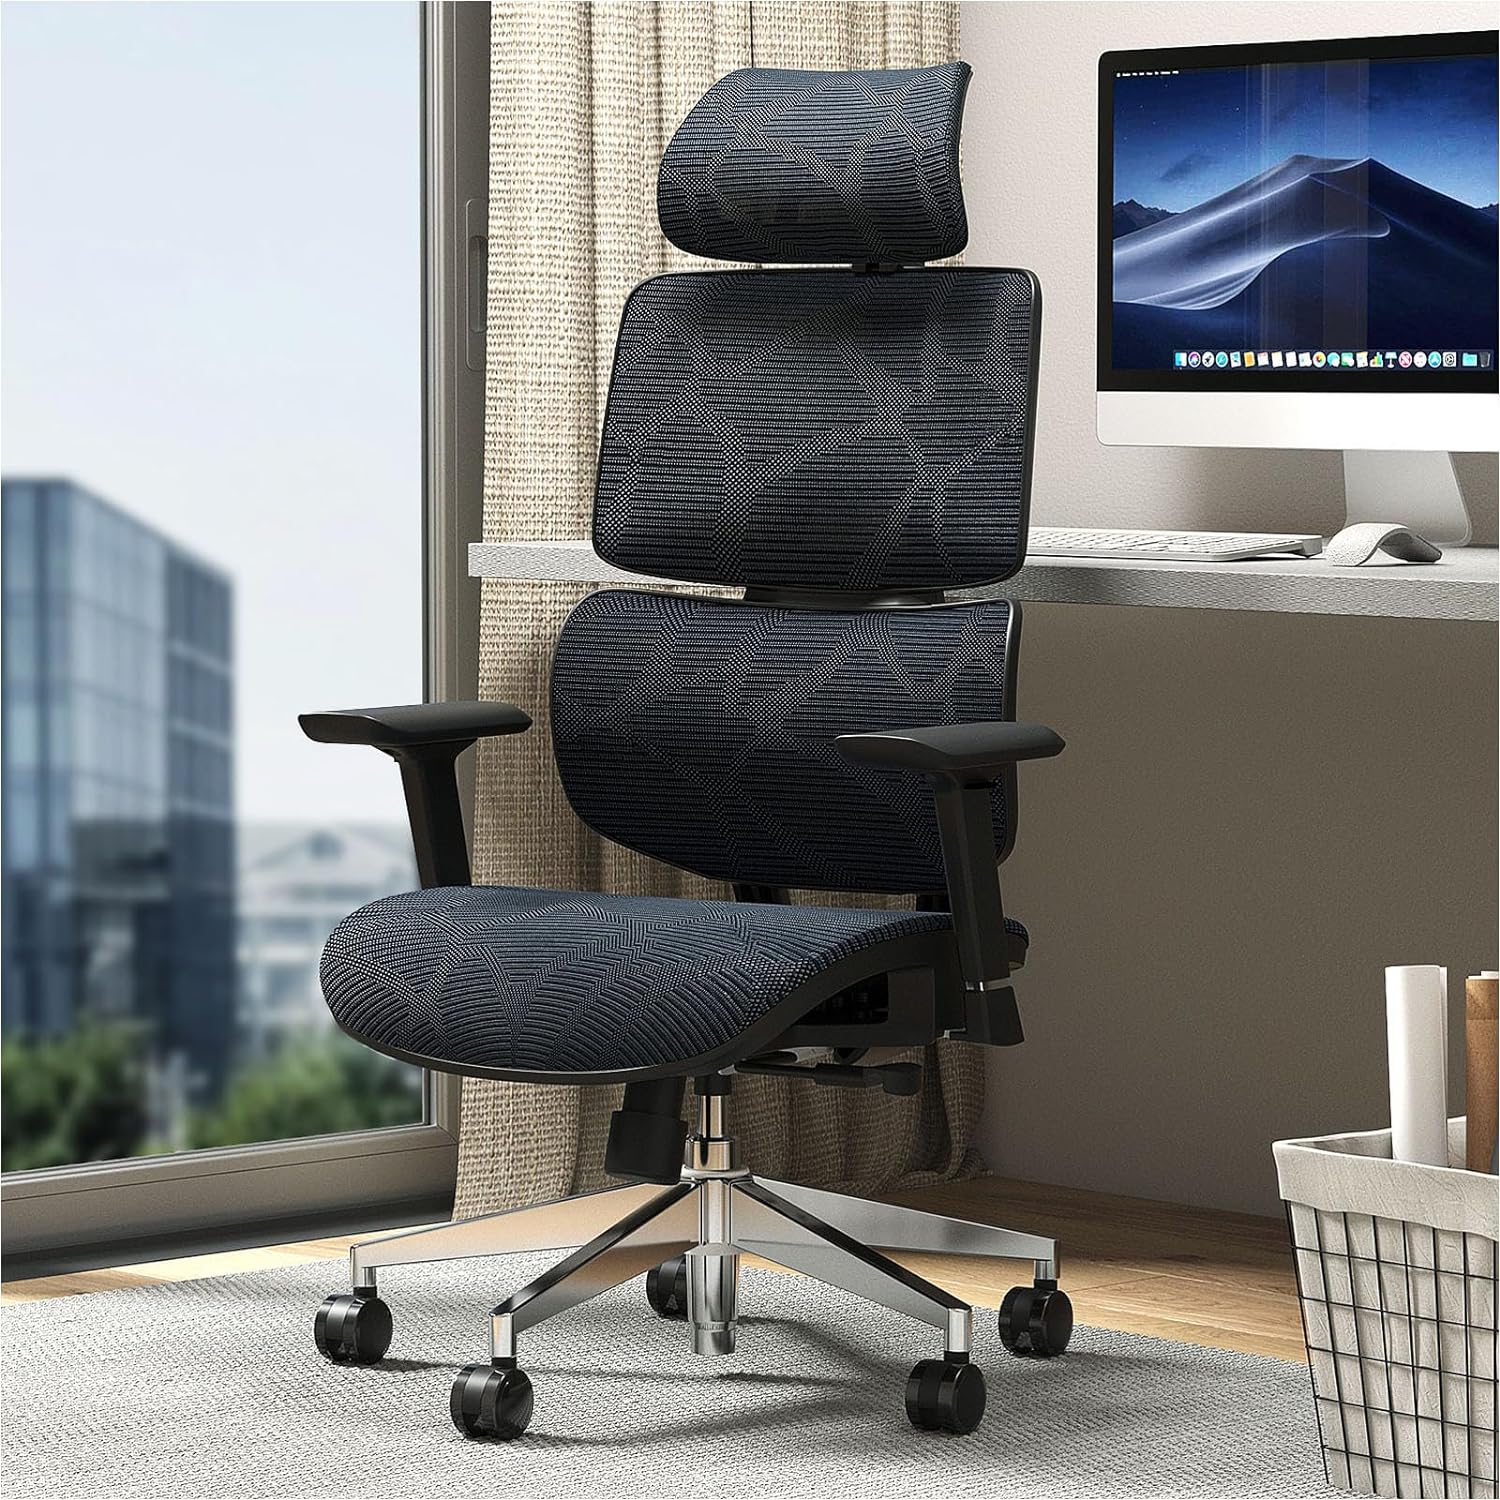 TONFARY Ergonomic Office Chair, Home Office Desk Chair with Lumbar Support, Adjustable Headrest Ergonomic Mesh Office Chair with 4D Armrests, Flexible Support Office Chair Waterfall Design